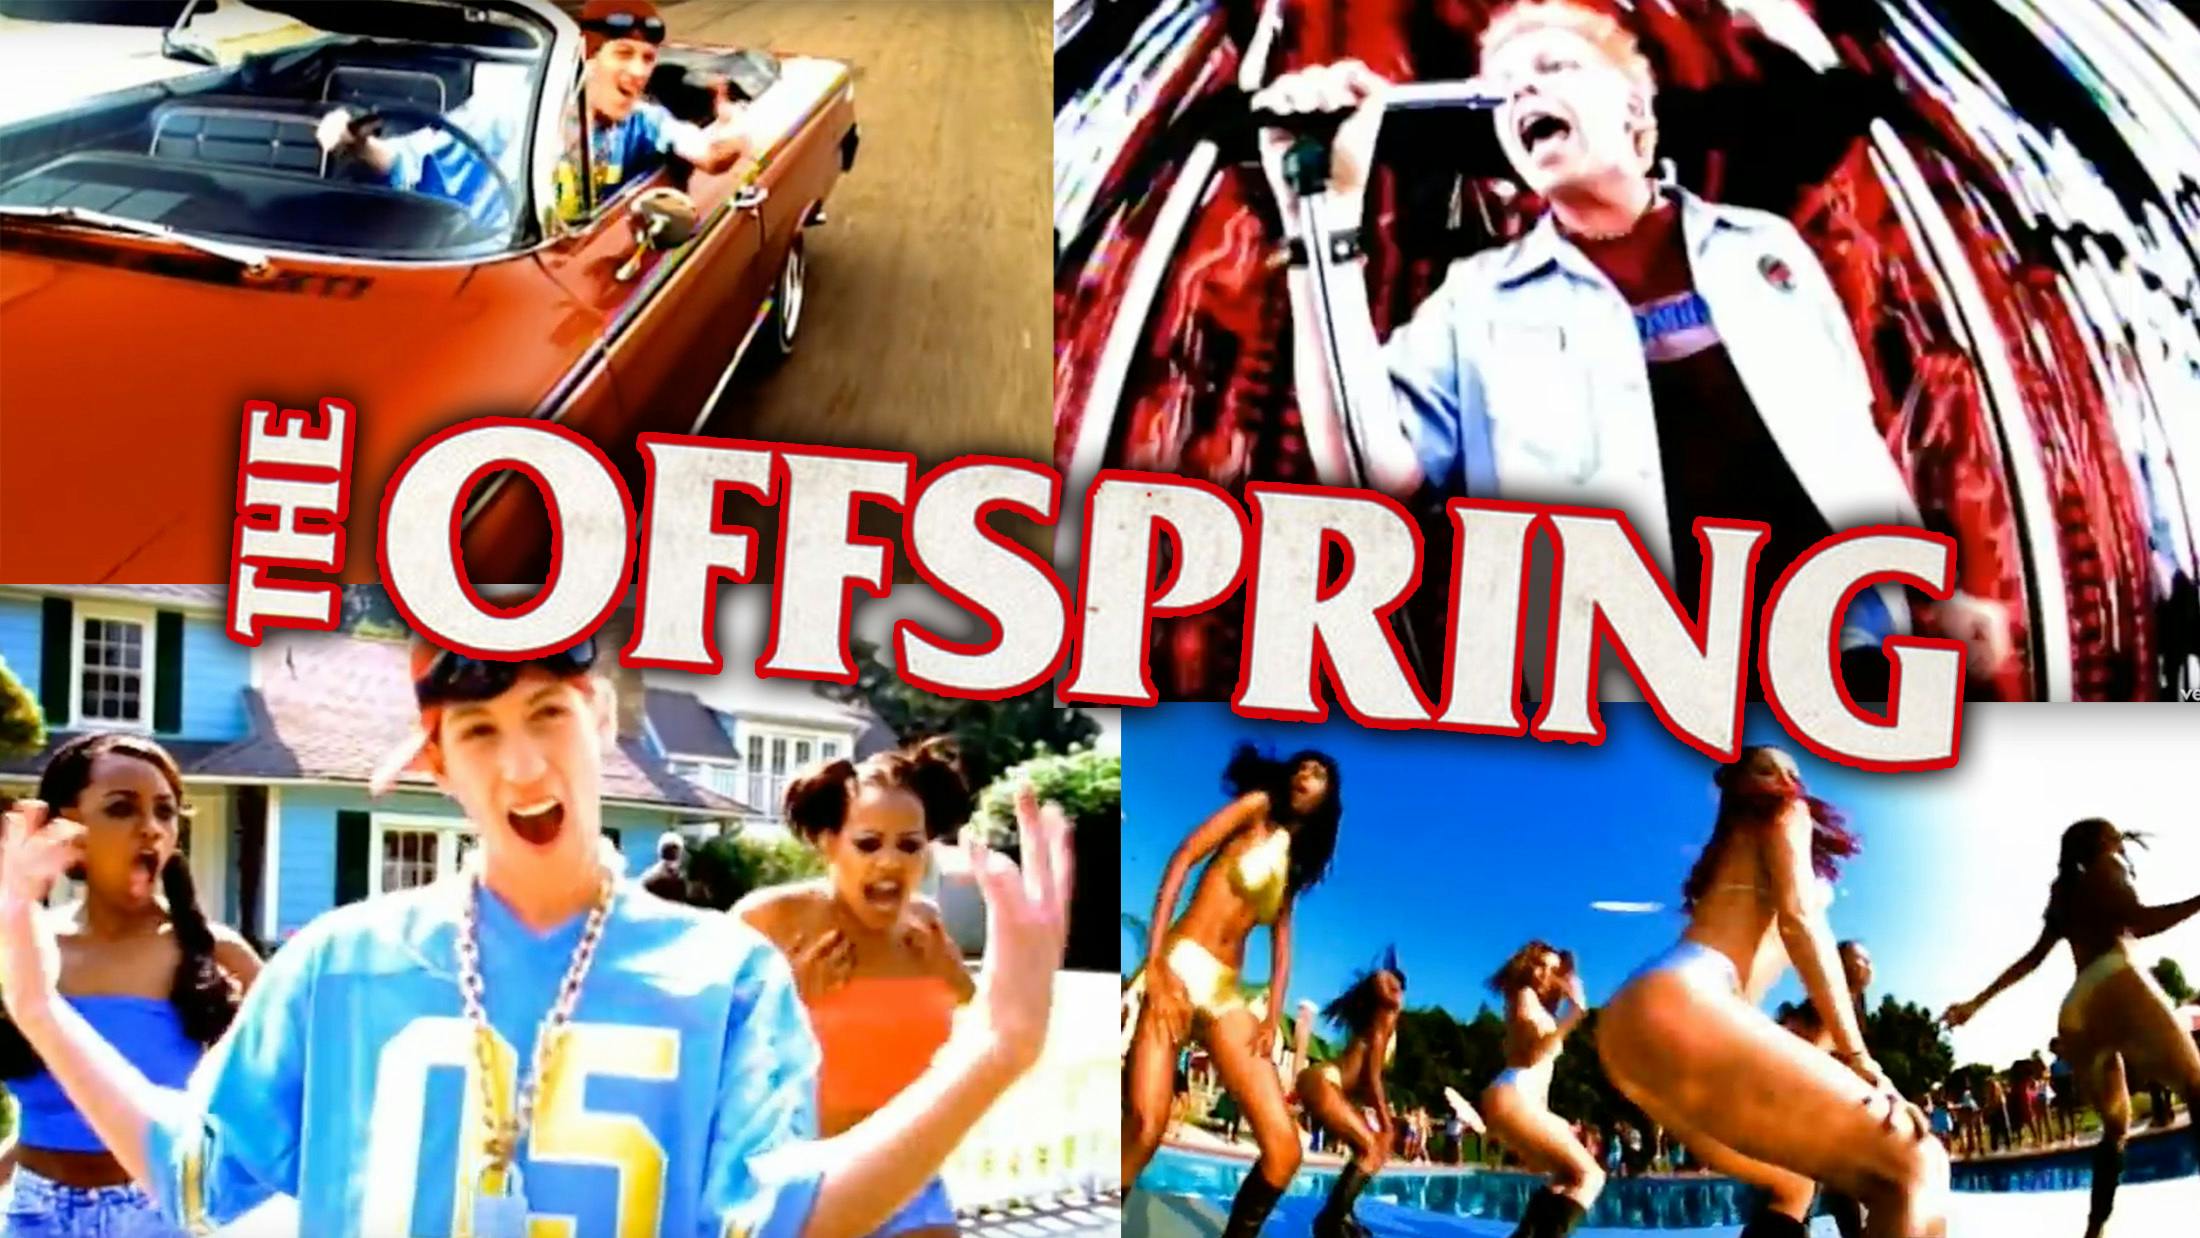 A Deep Dive Into The Music Video For Pretty Fly (For A White Guy) By The Offspring